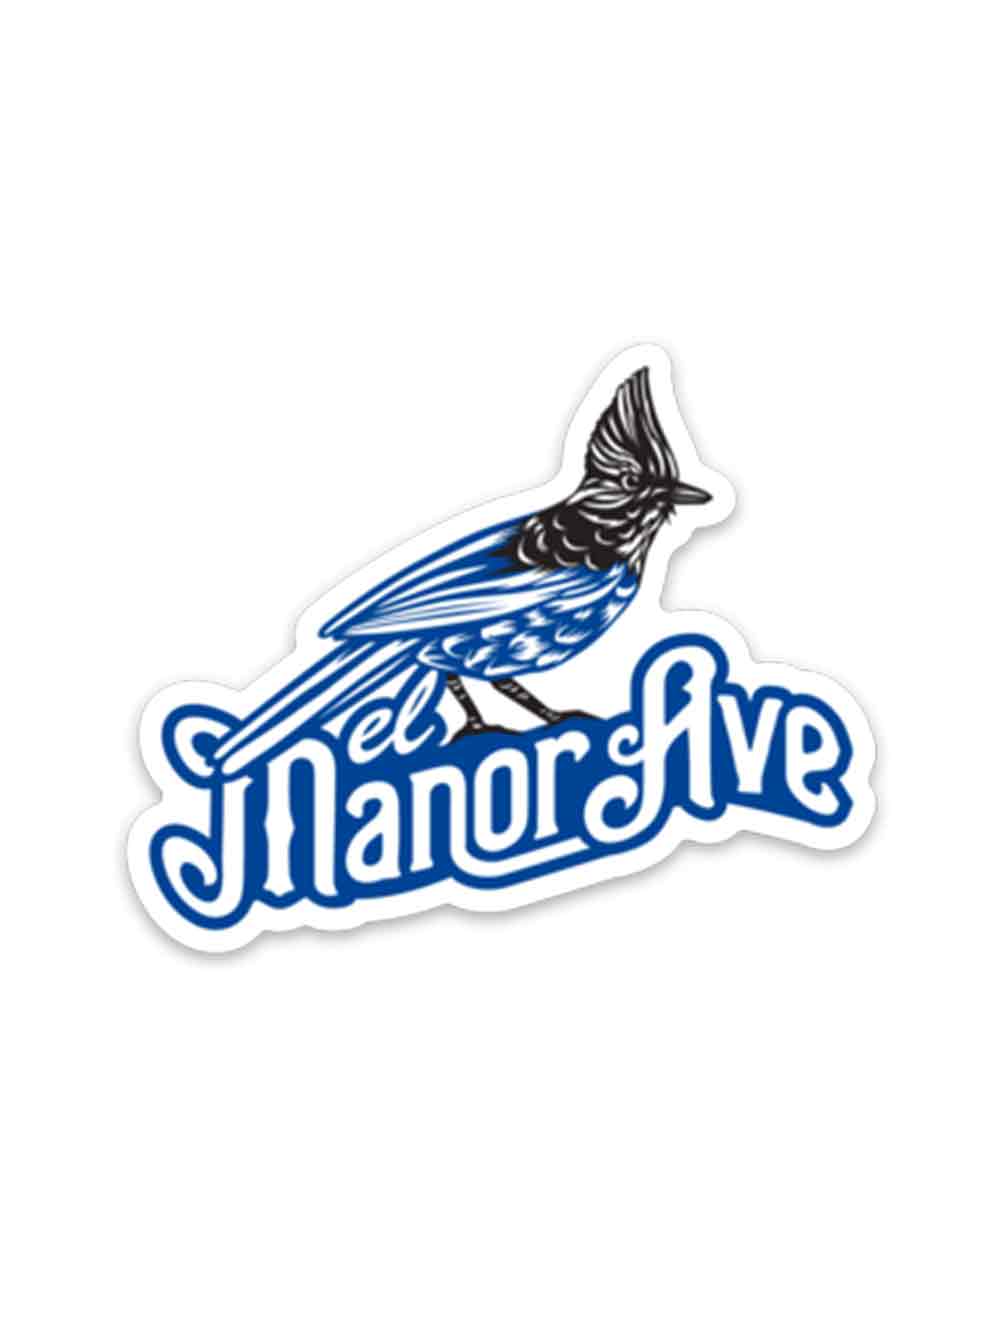 Die cut vinyl sticker of the El Manor Ave logo. This features a steller's jay and the words El Manor Ave in blue, white, and black.